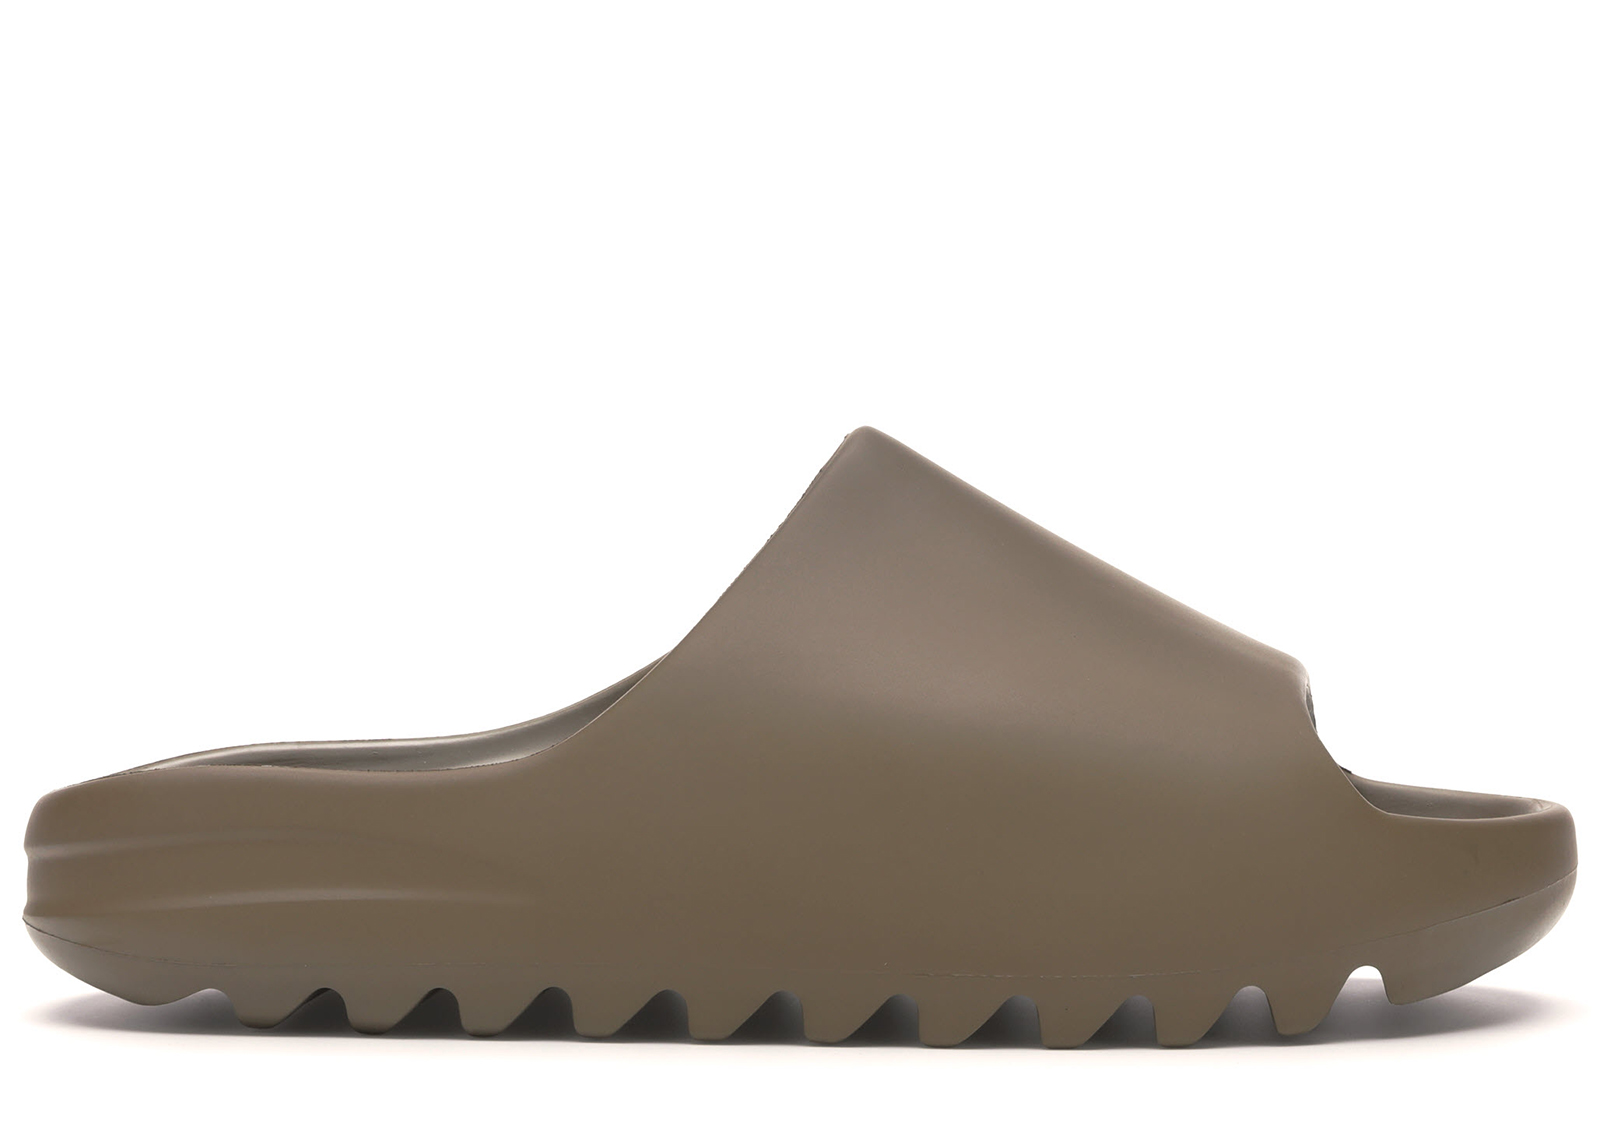 adidas Yeezy Slide Pure (First Release) Men's - GZ5554 - US